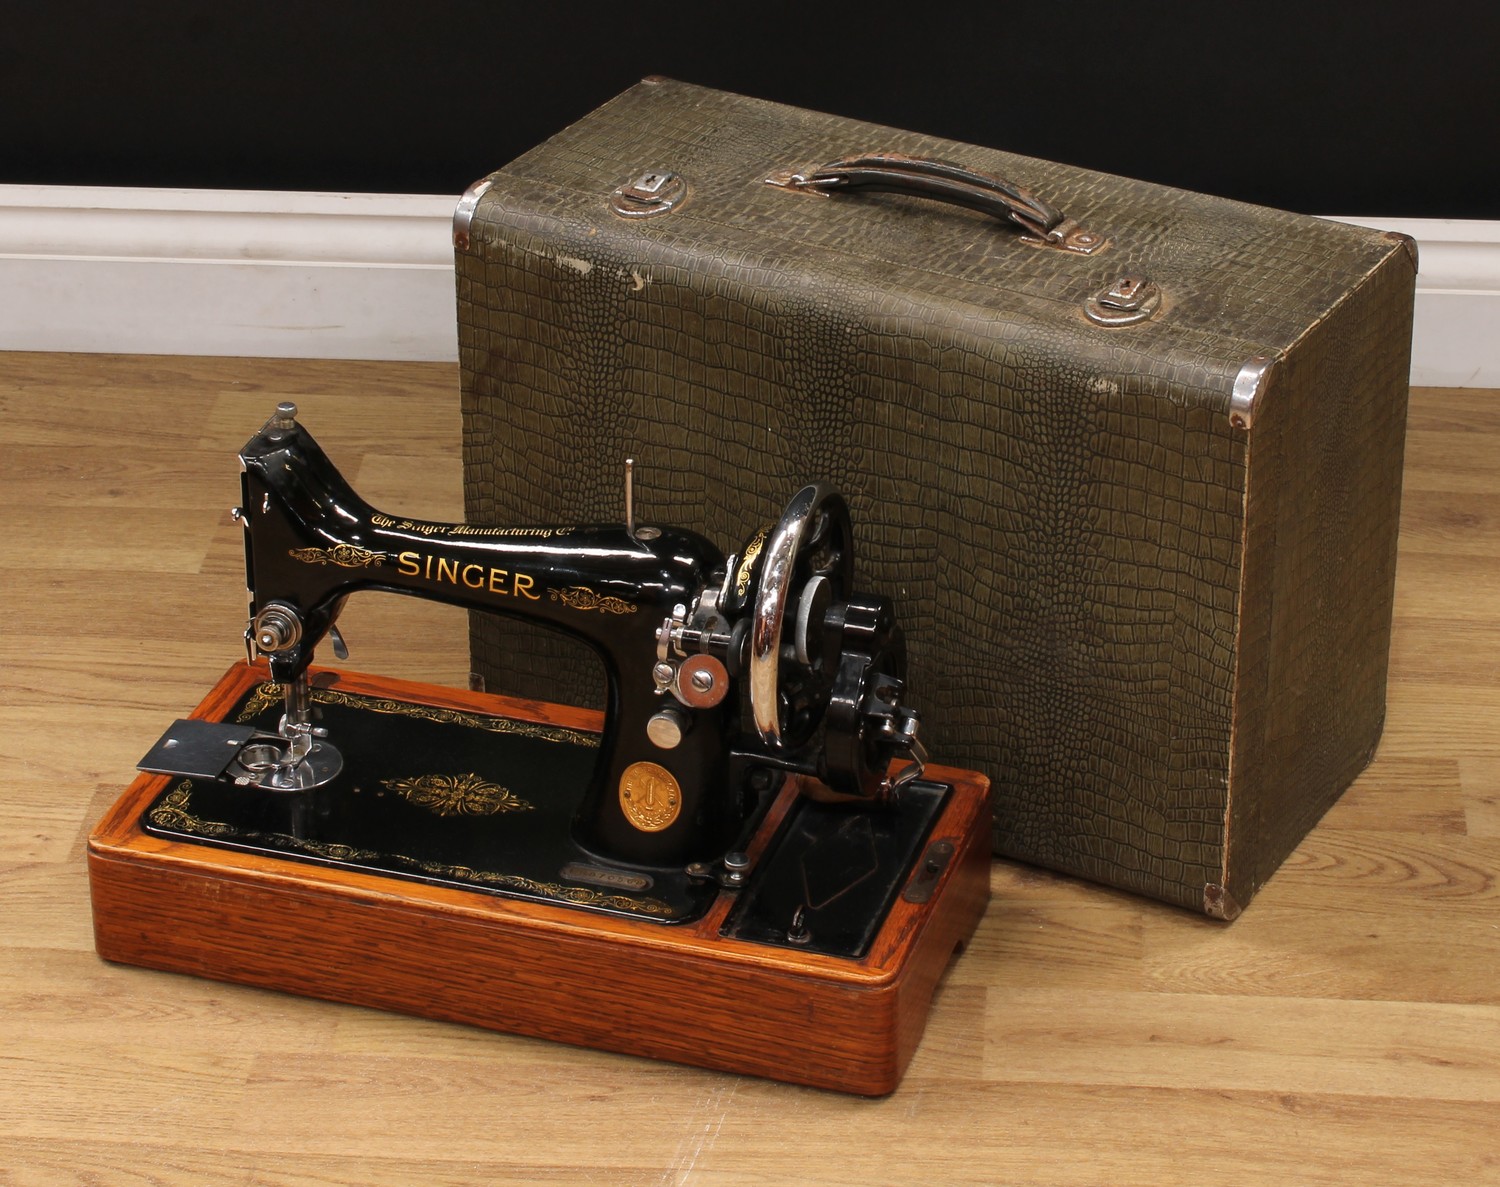 Painting an old mock croc case for a Singer Sewing Machine 